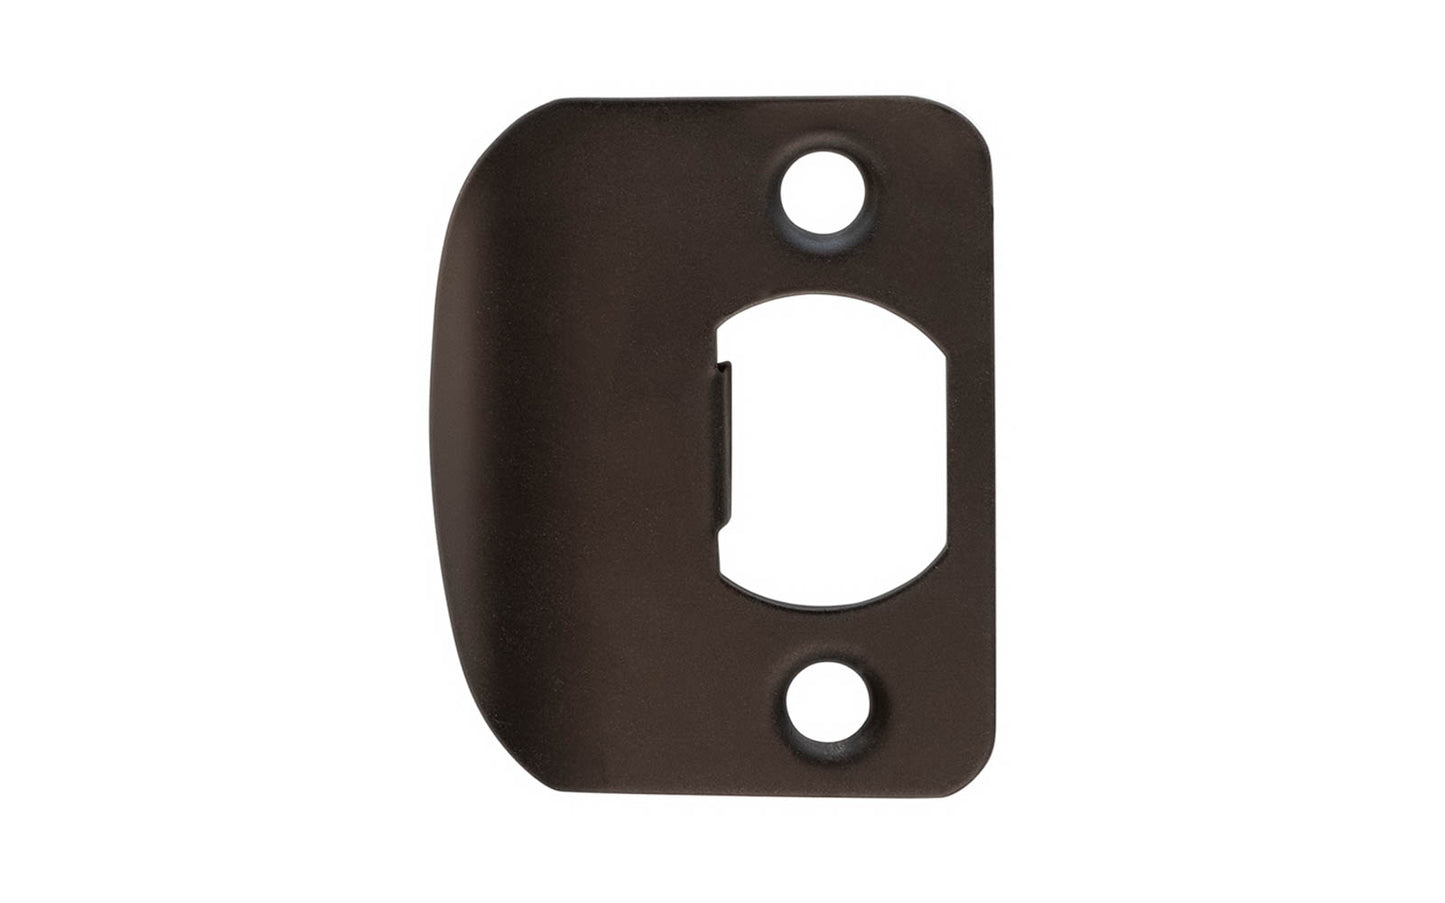 Vintage-style Hardware · Traditional & classic-style ~ For interior doors ~ Classic & traditional oil rubbed bronze full lip door strike made of quality solid brass material. 2-1/4" High x 1-3/4" Wide overall size. Available in five different finishes. Includes two phillips flat-head screws